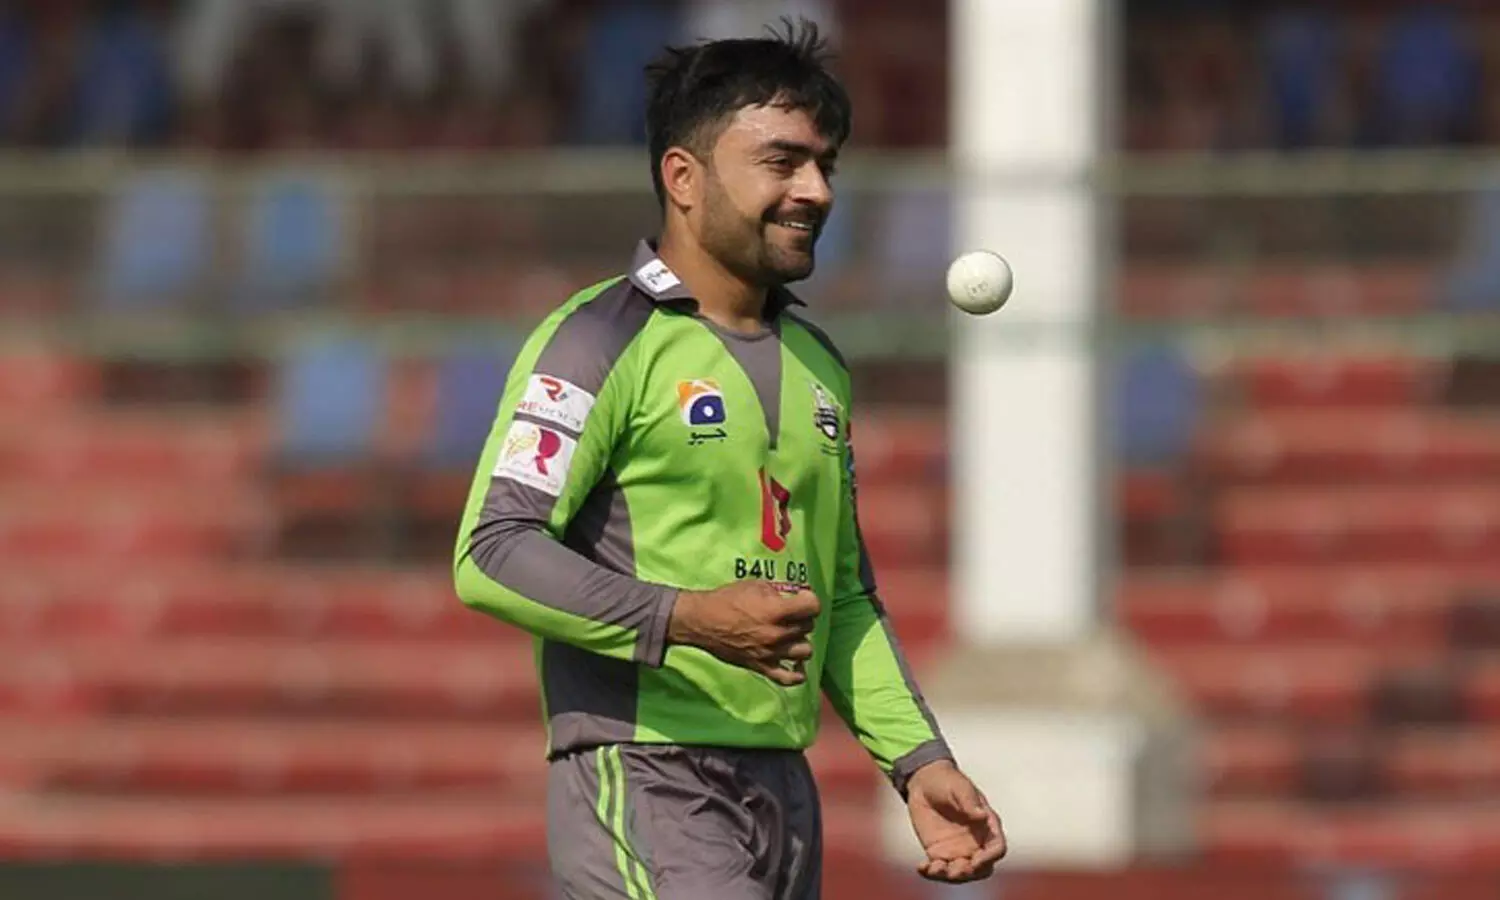 PSL 2022: Rashid Khan smashes six without looking at ball, video goes viral - WATCH